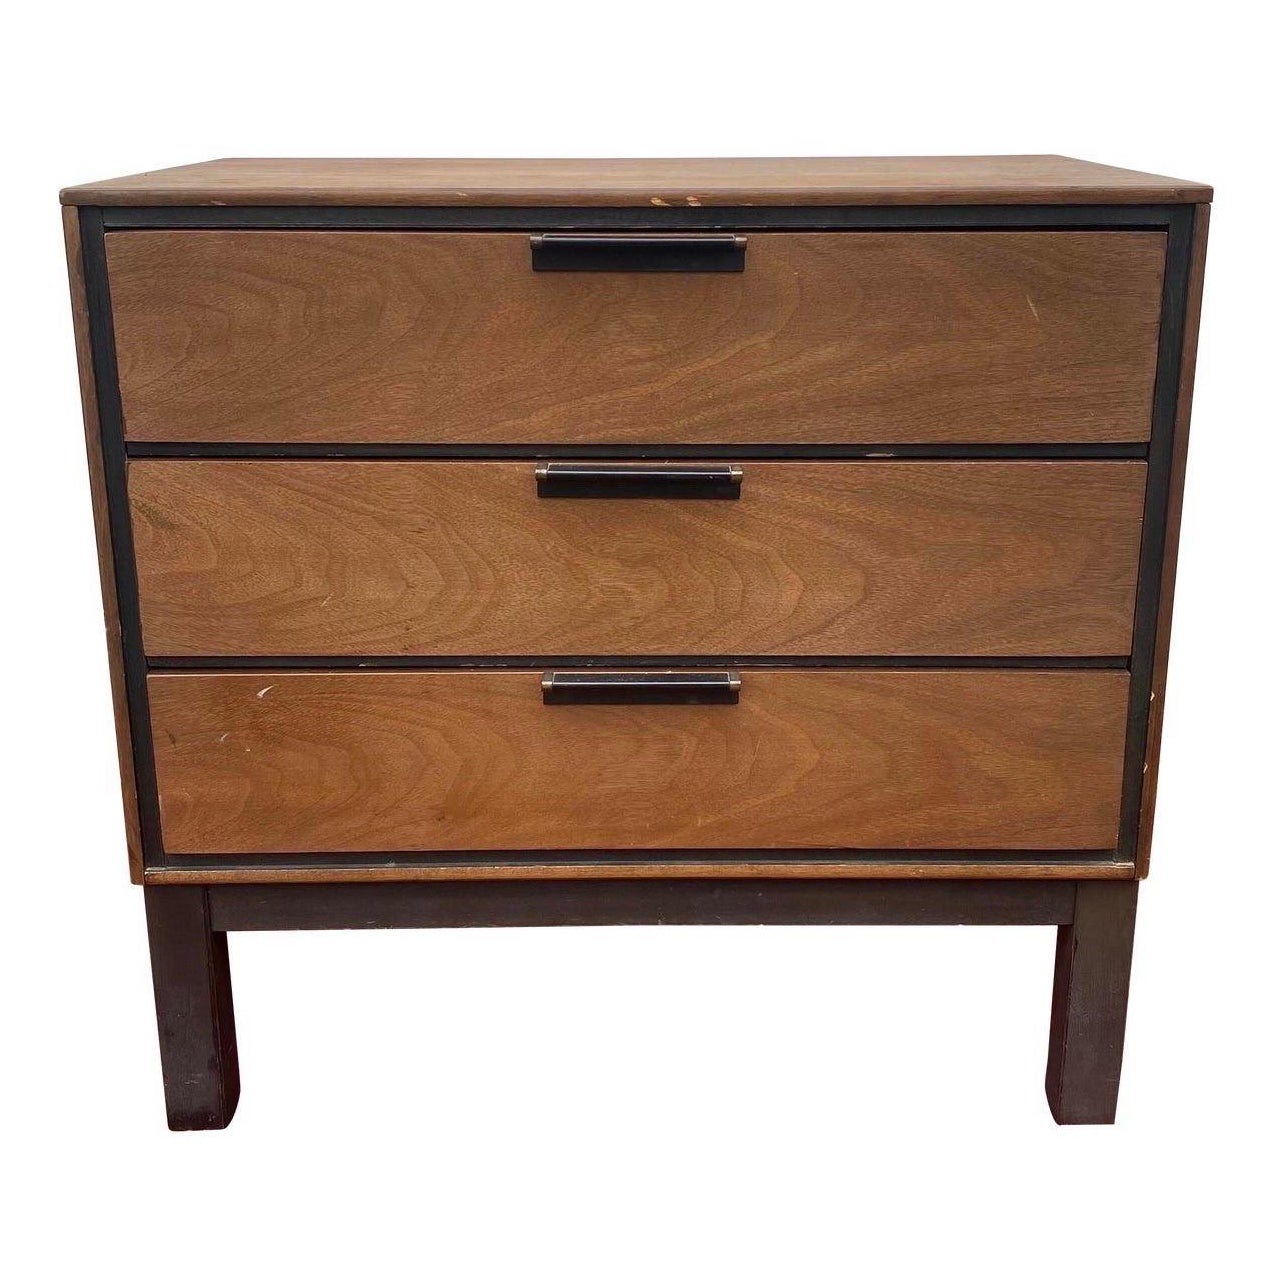 Mid-20th Century Harvey Probber Style 3 Drawer Small Chest For Sale